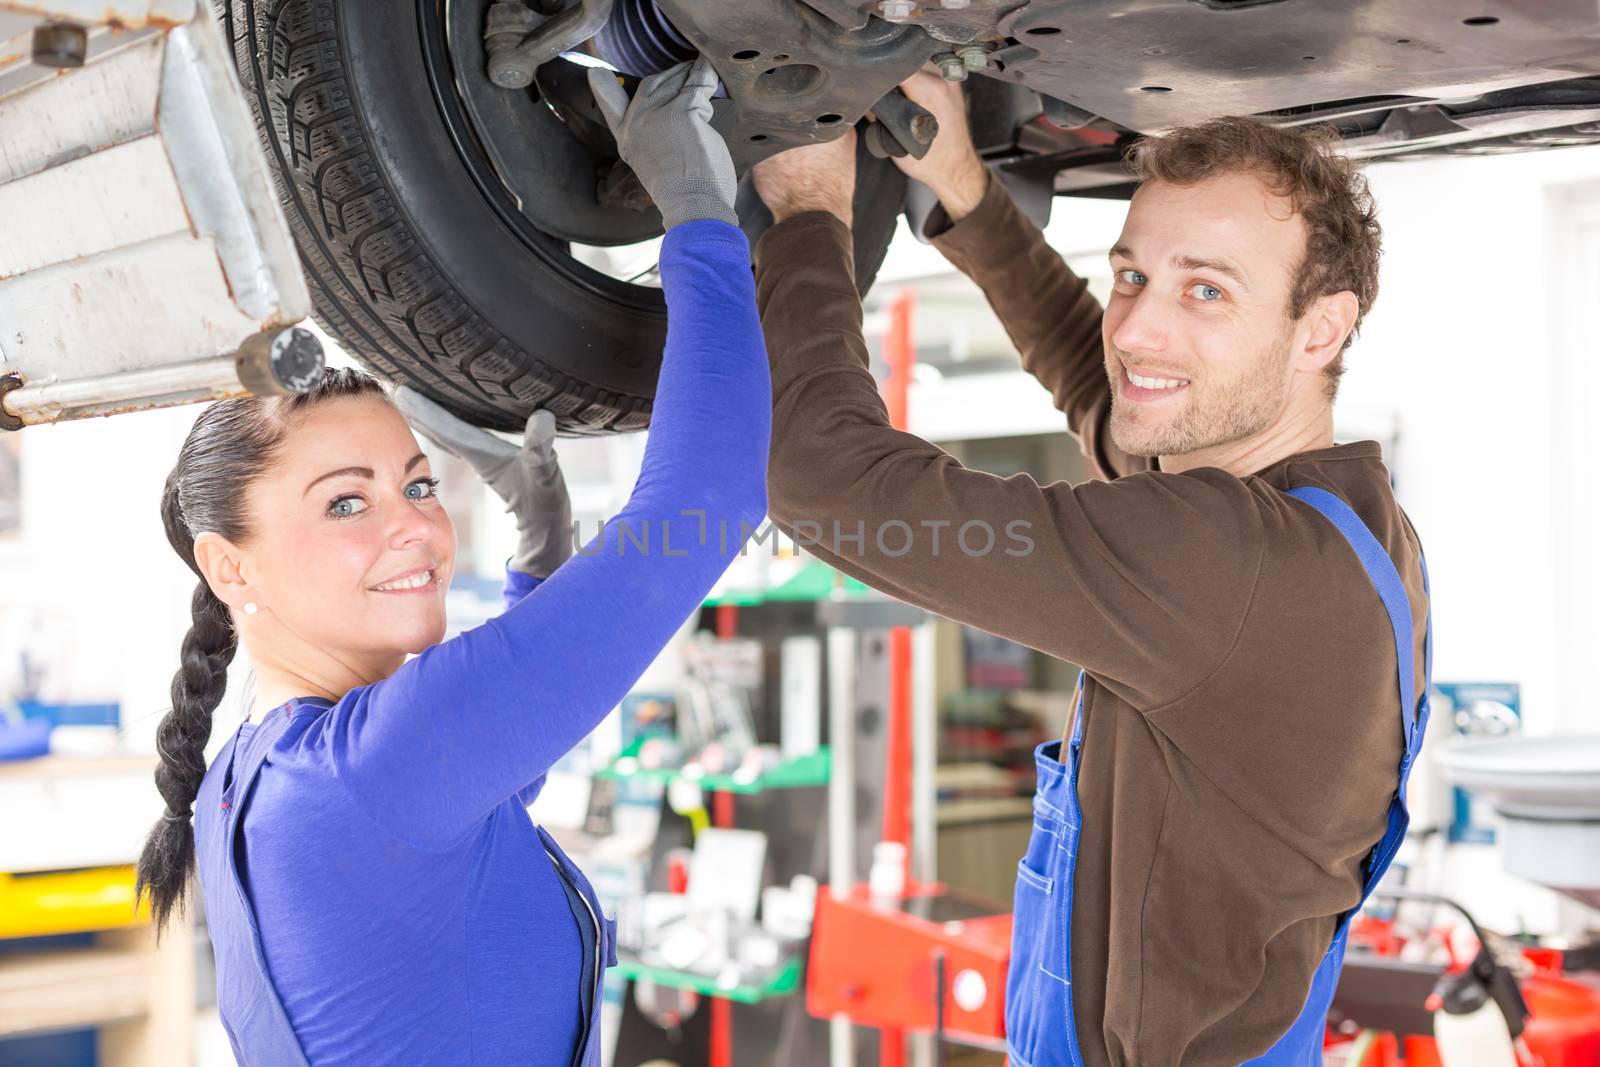 Two mechanics repairing or inspecting a car on hydraulic lift